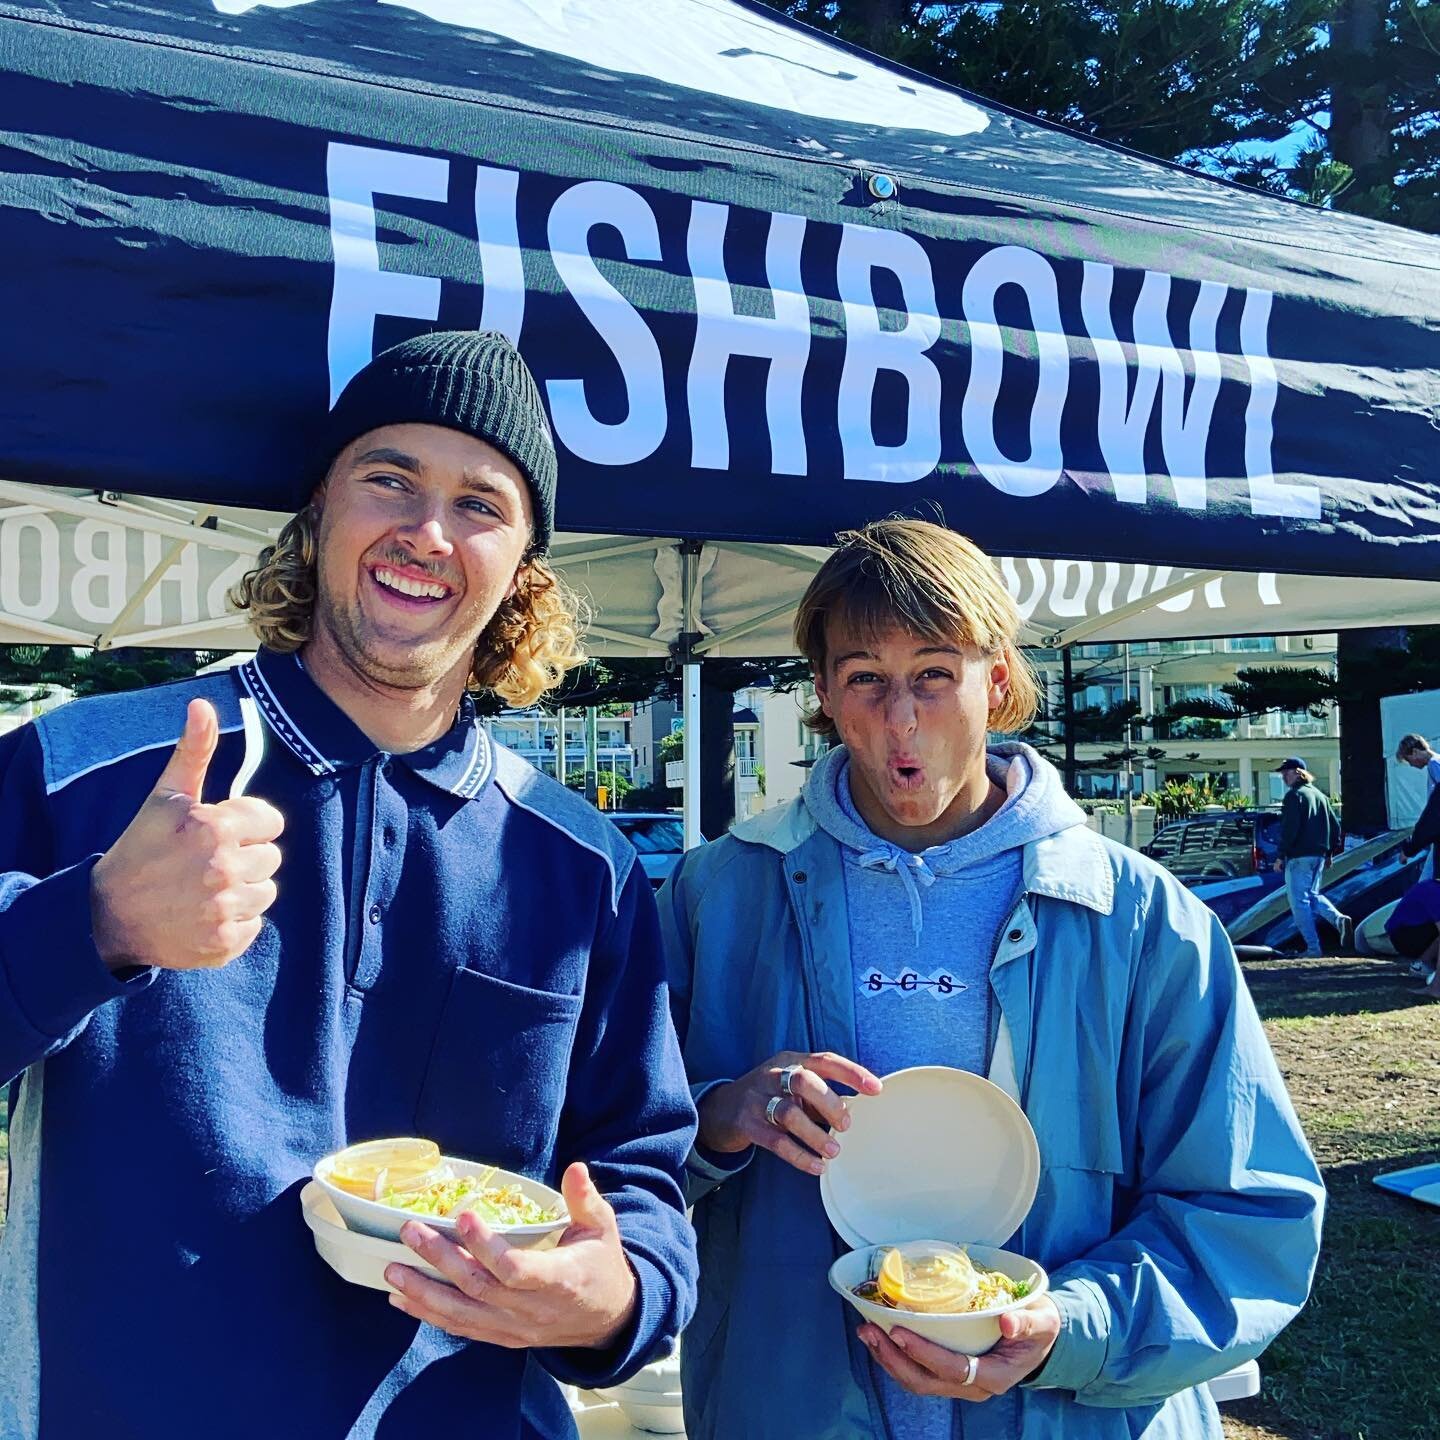 Stoked to have @fishbowl_fuel down here providing our competitors complimentary bowls / surf fuel. Cheers legends!